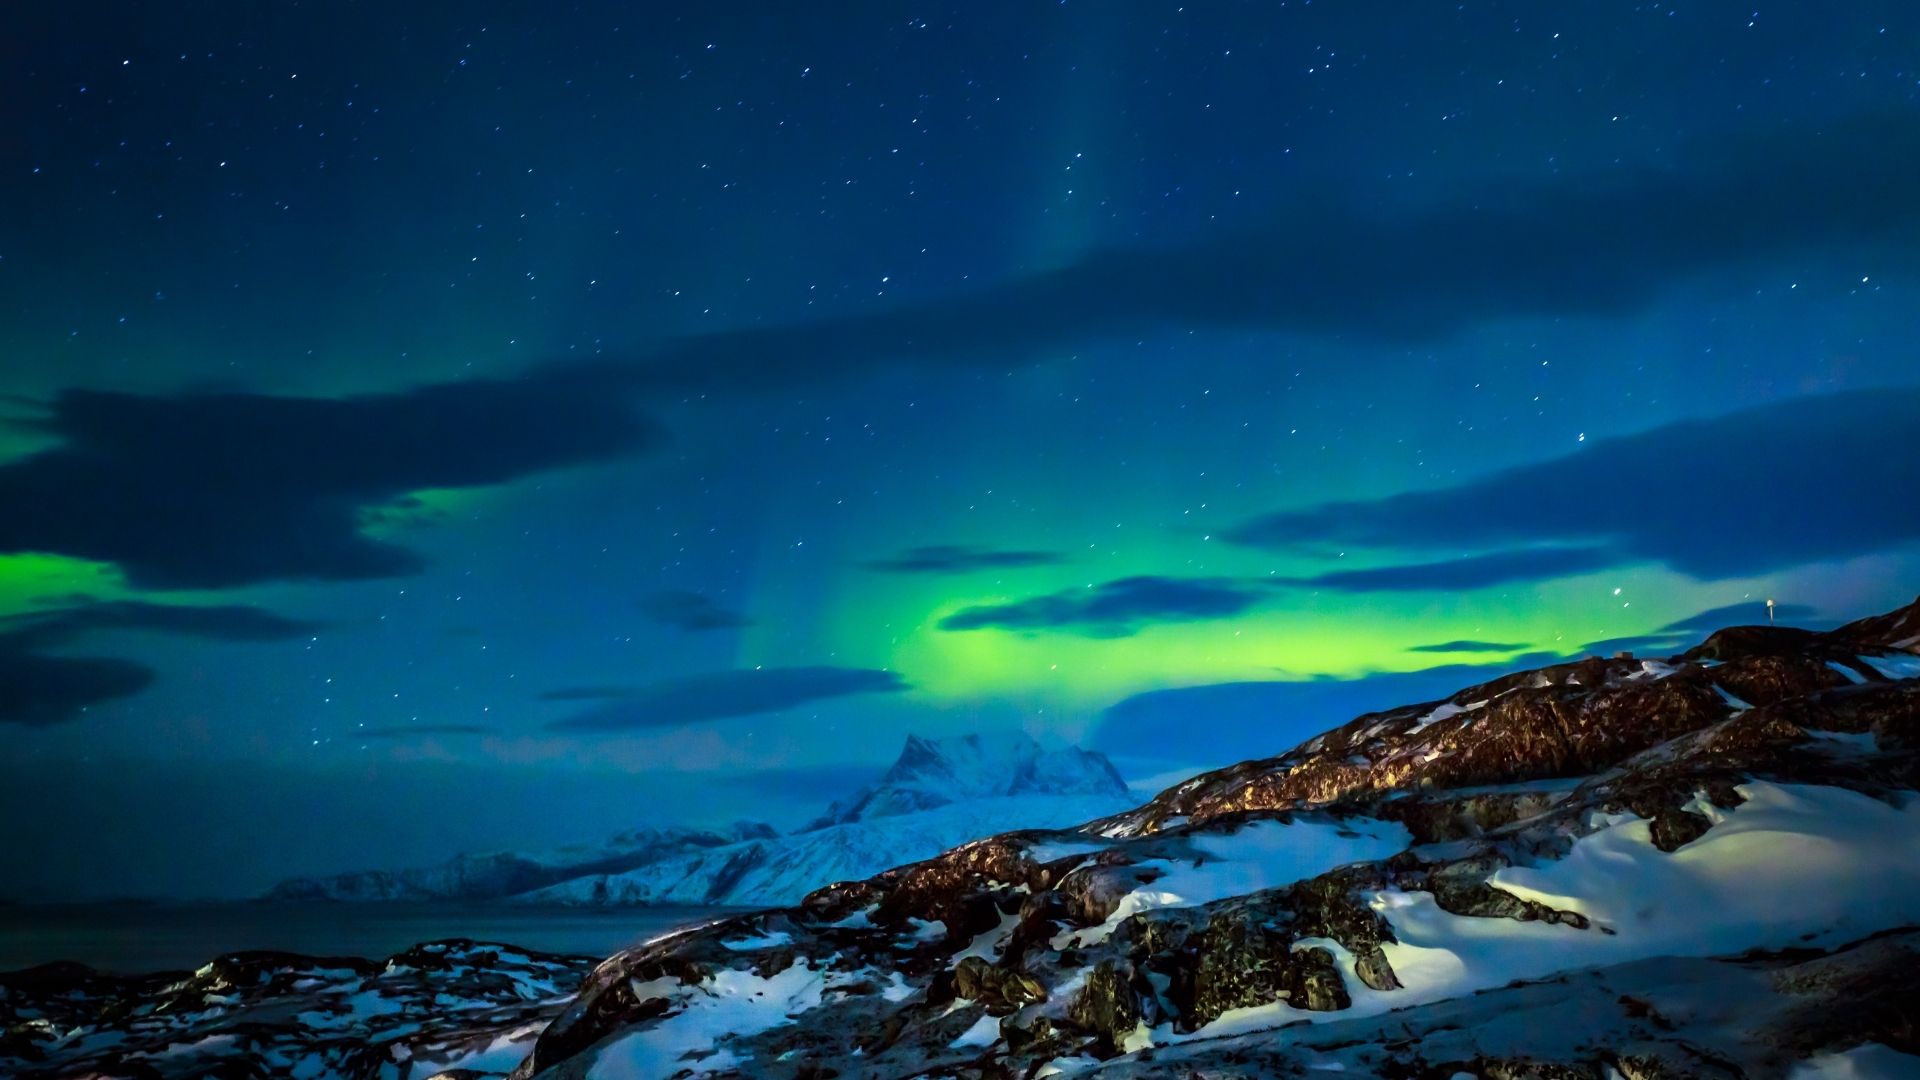 Private jet charter to Scandinavia for an exclusive nordic adventure, exploring art and culture in Scandinavia, and witnessing the northern lights.